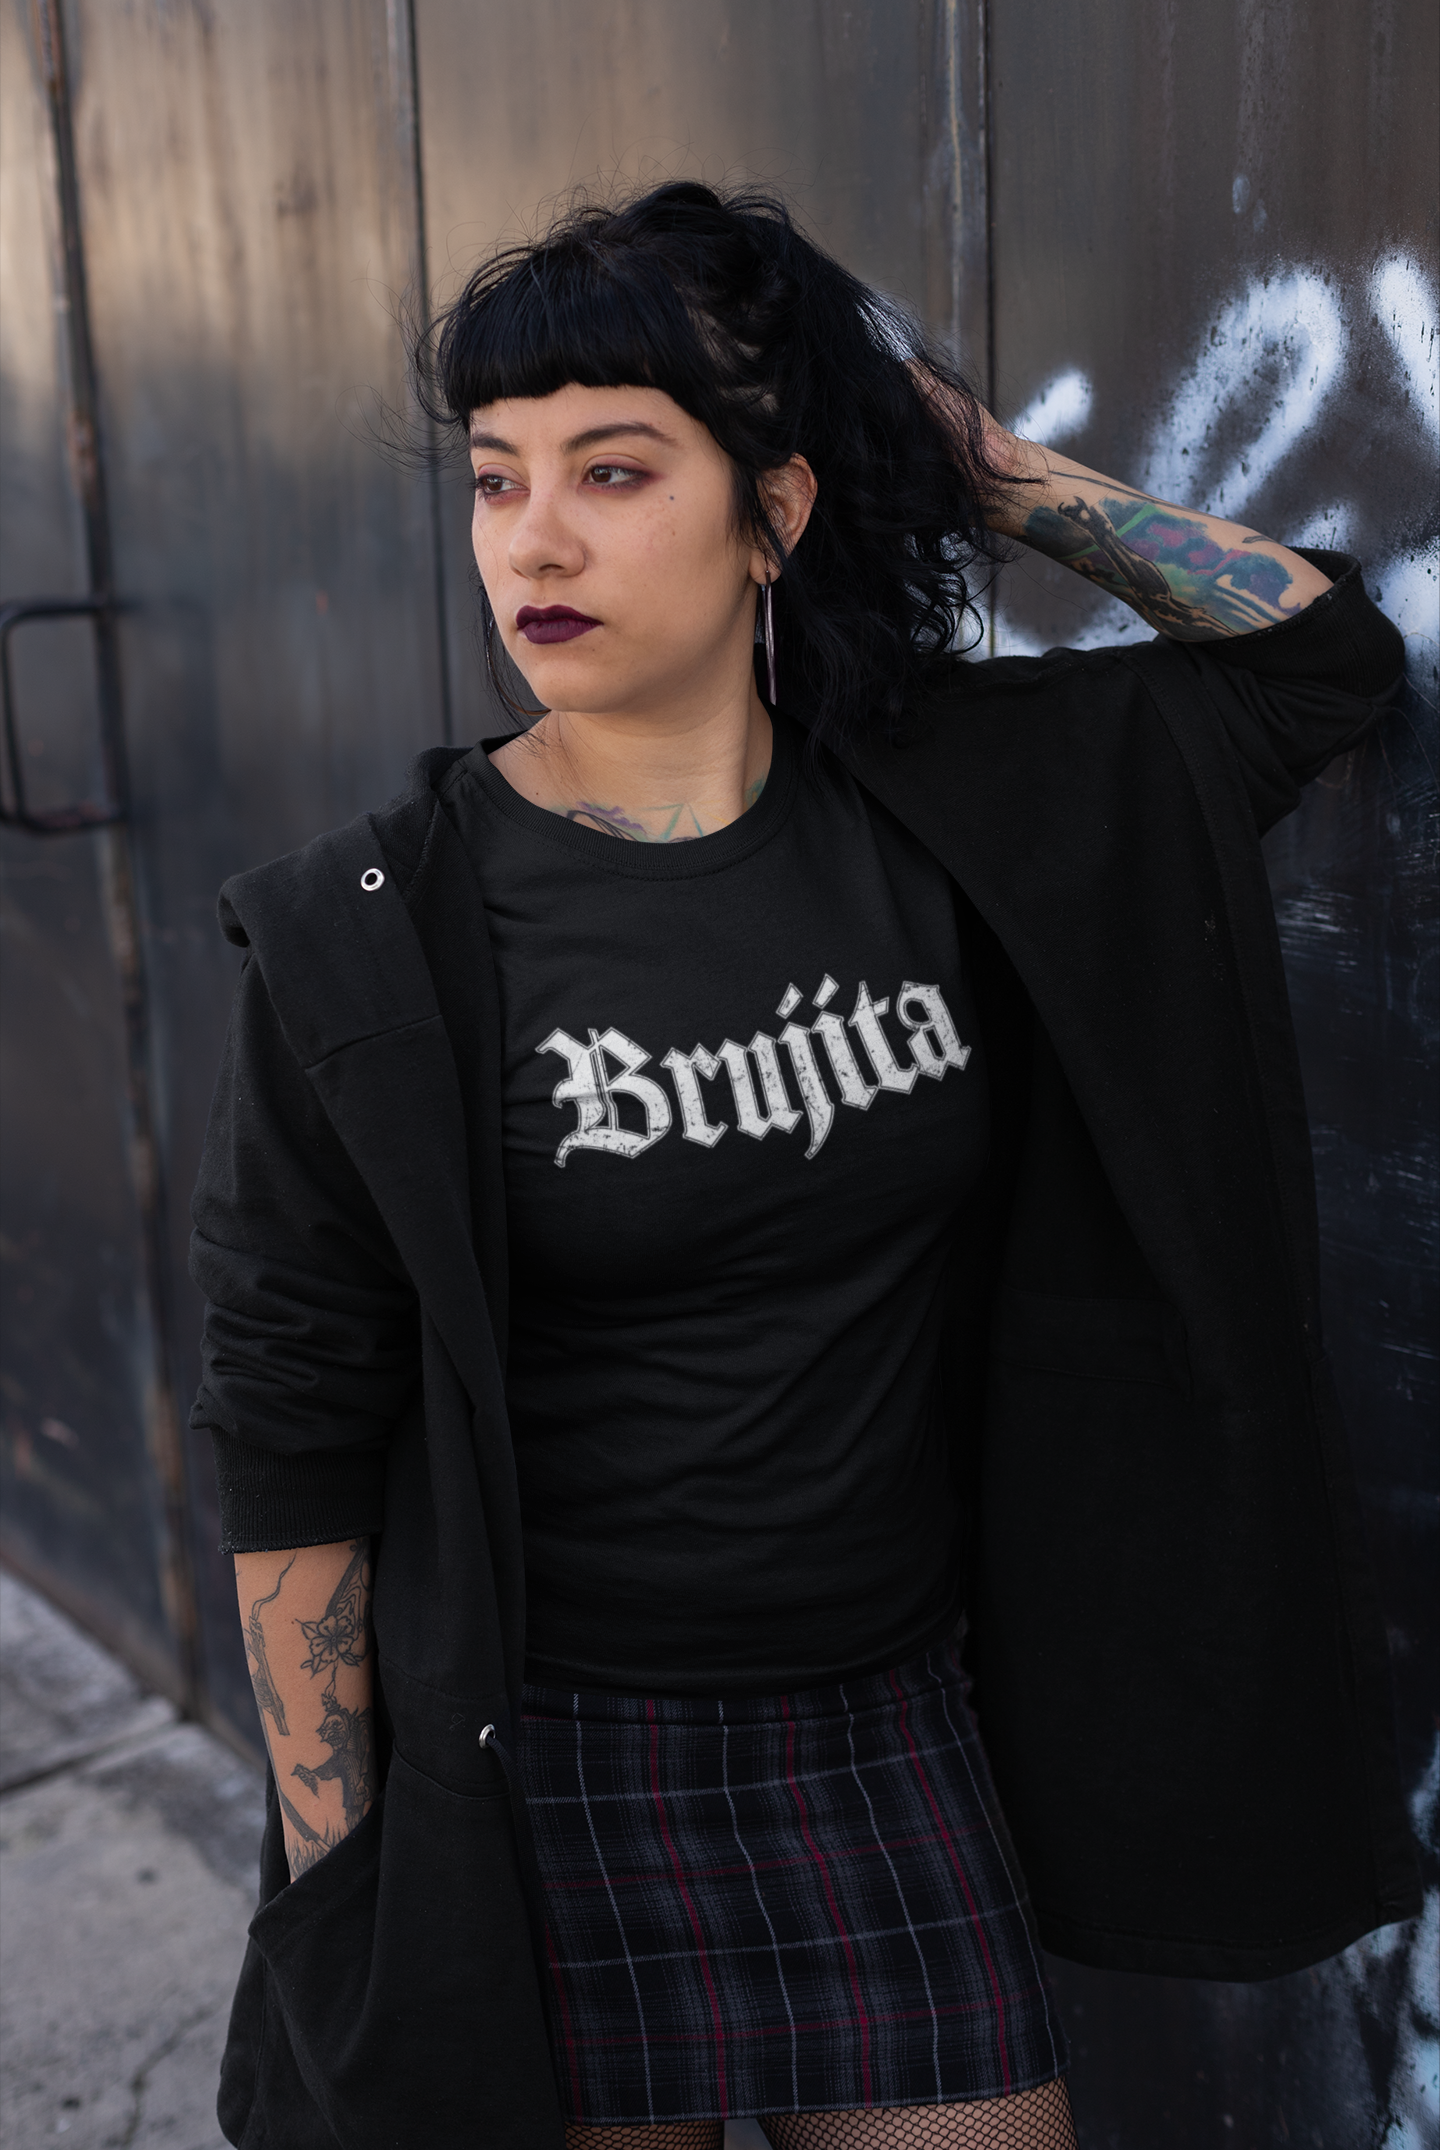 Woman wearing Brujita T-Shirt leaning against a wall – Modern witch vibes, gothic style